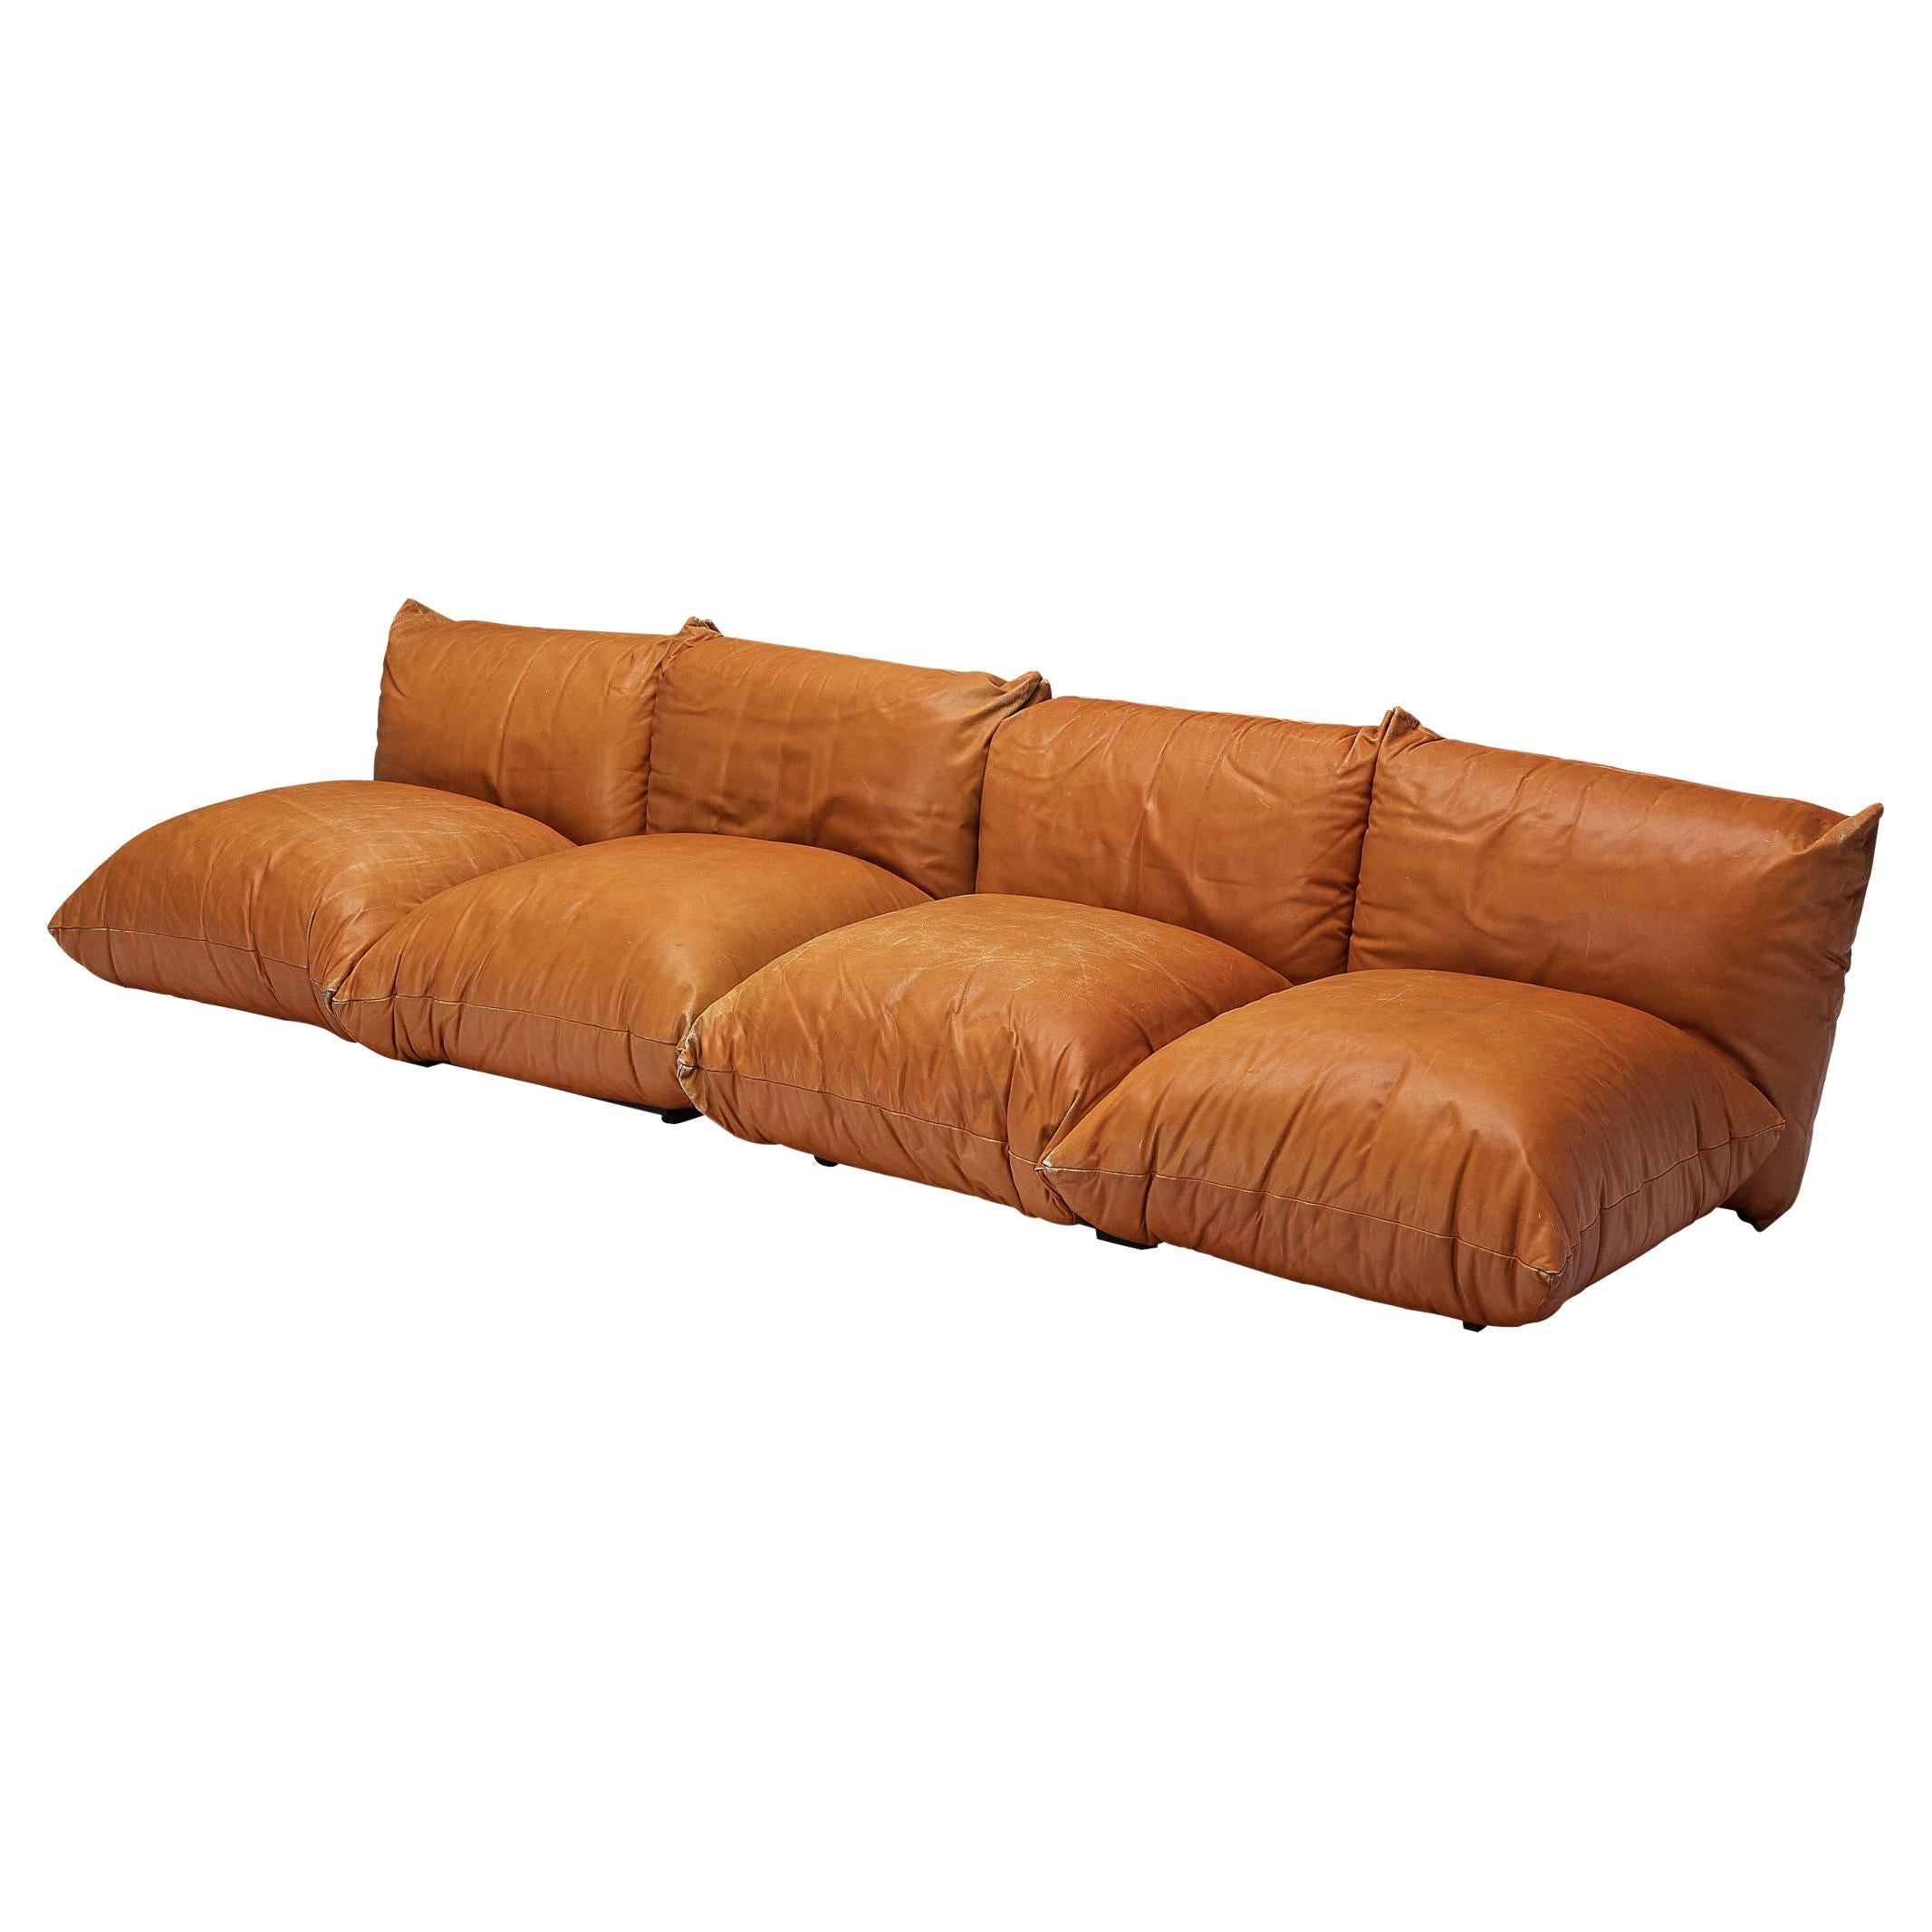 Mario Marenco for Arflex Sectional Sofa in Cognac Leather